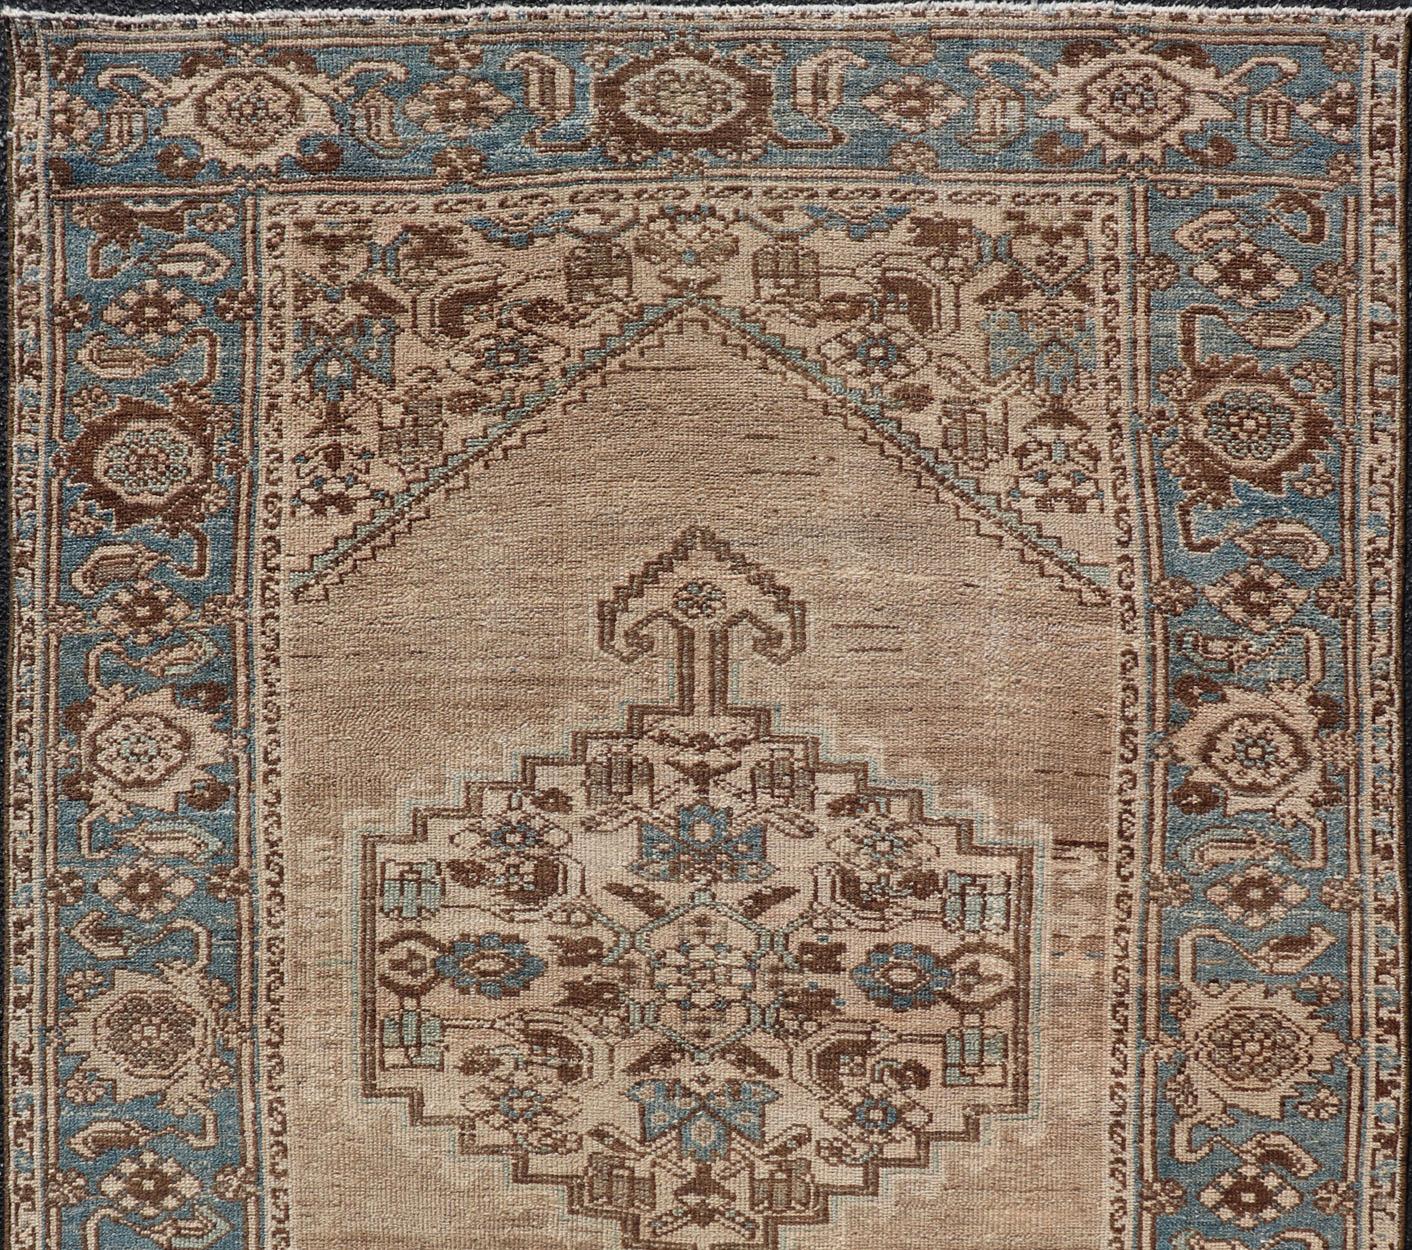 Wool Antique Persian Hamadan Rug with Medallion Design in Tan, Light Blue & Brown For Sale